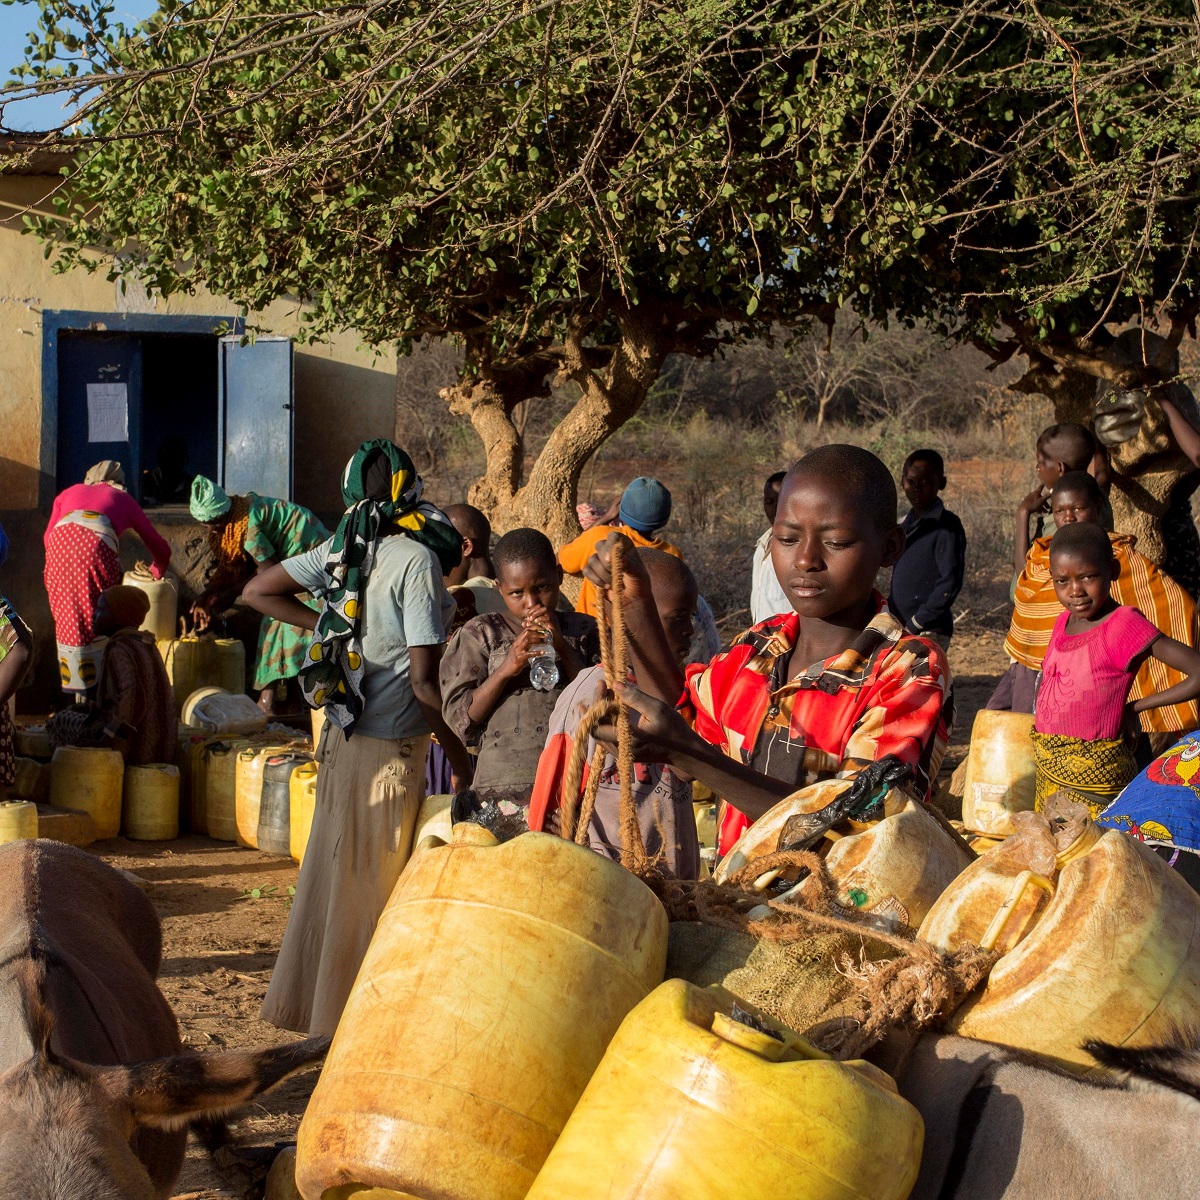 Villagers queuing for water at a pump in Kenya's arid Eastern Province. Photo: Flore de Preneuf / World Bank